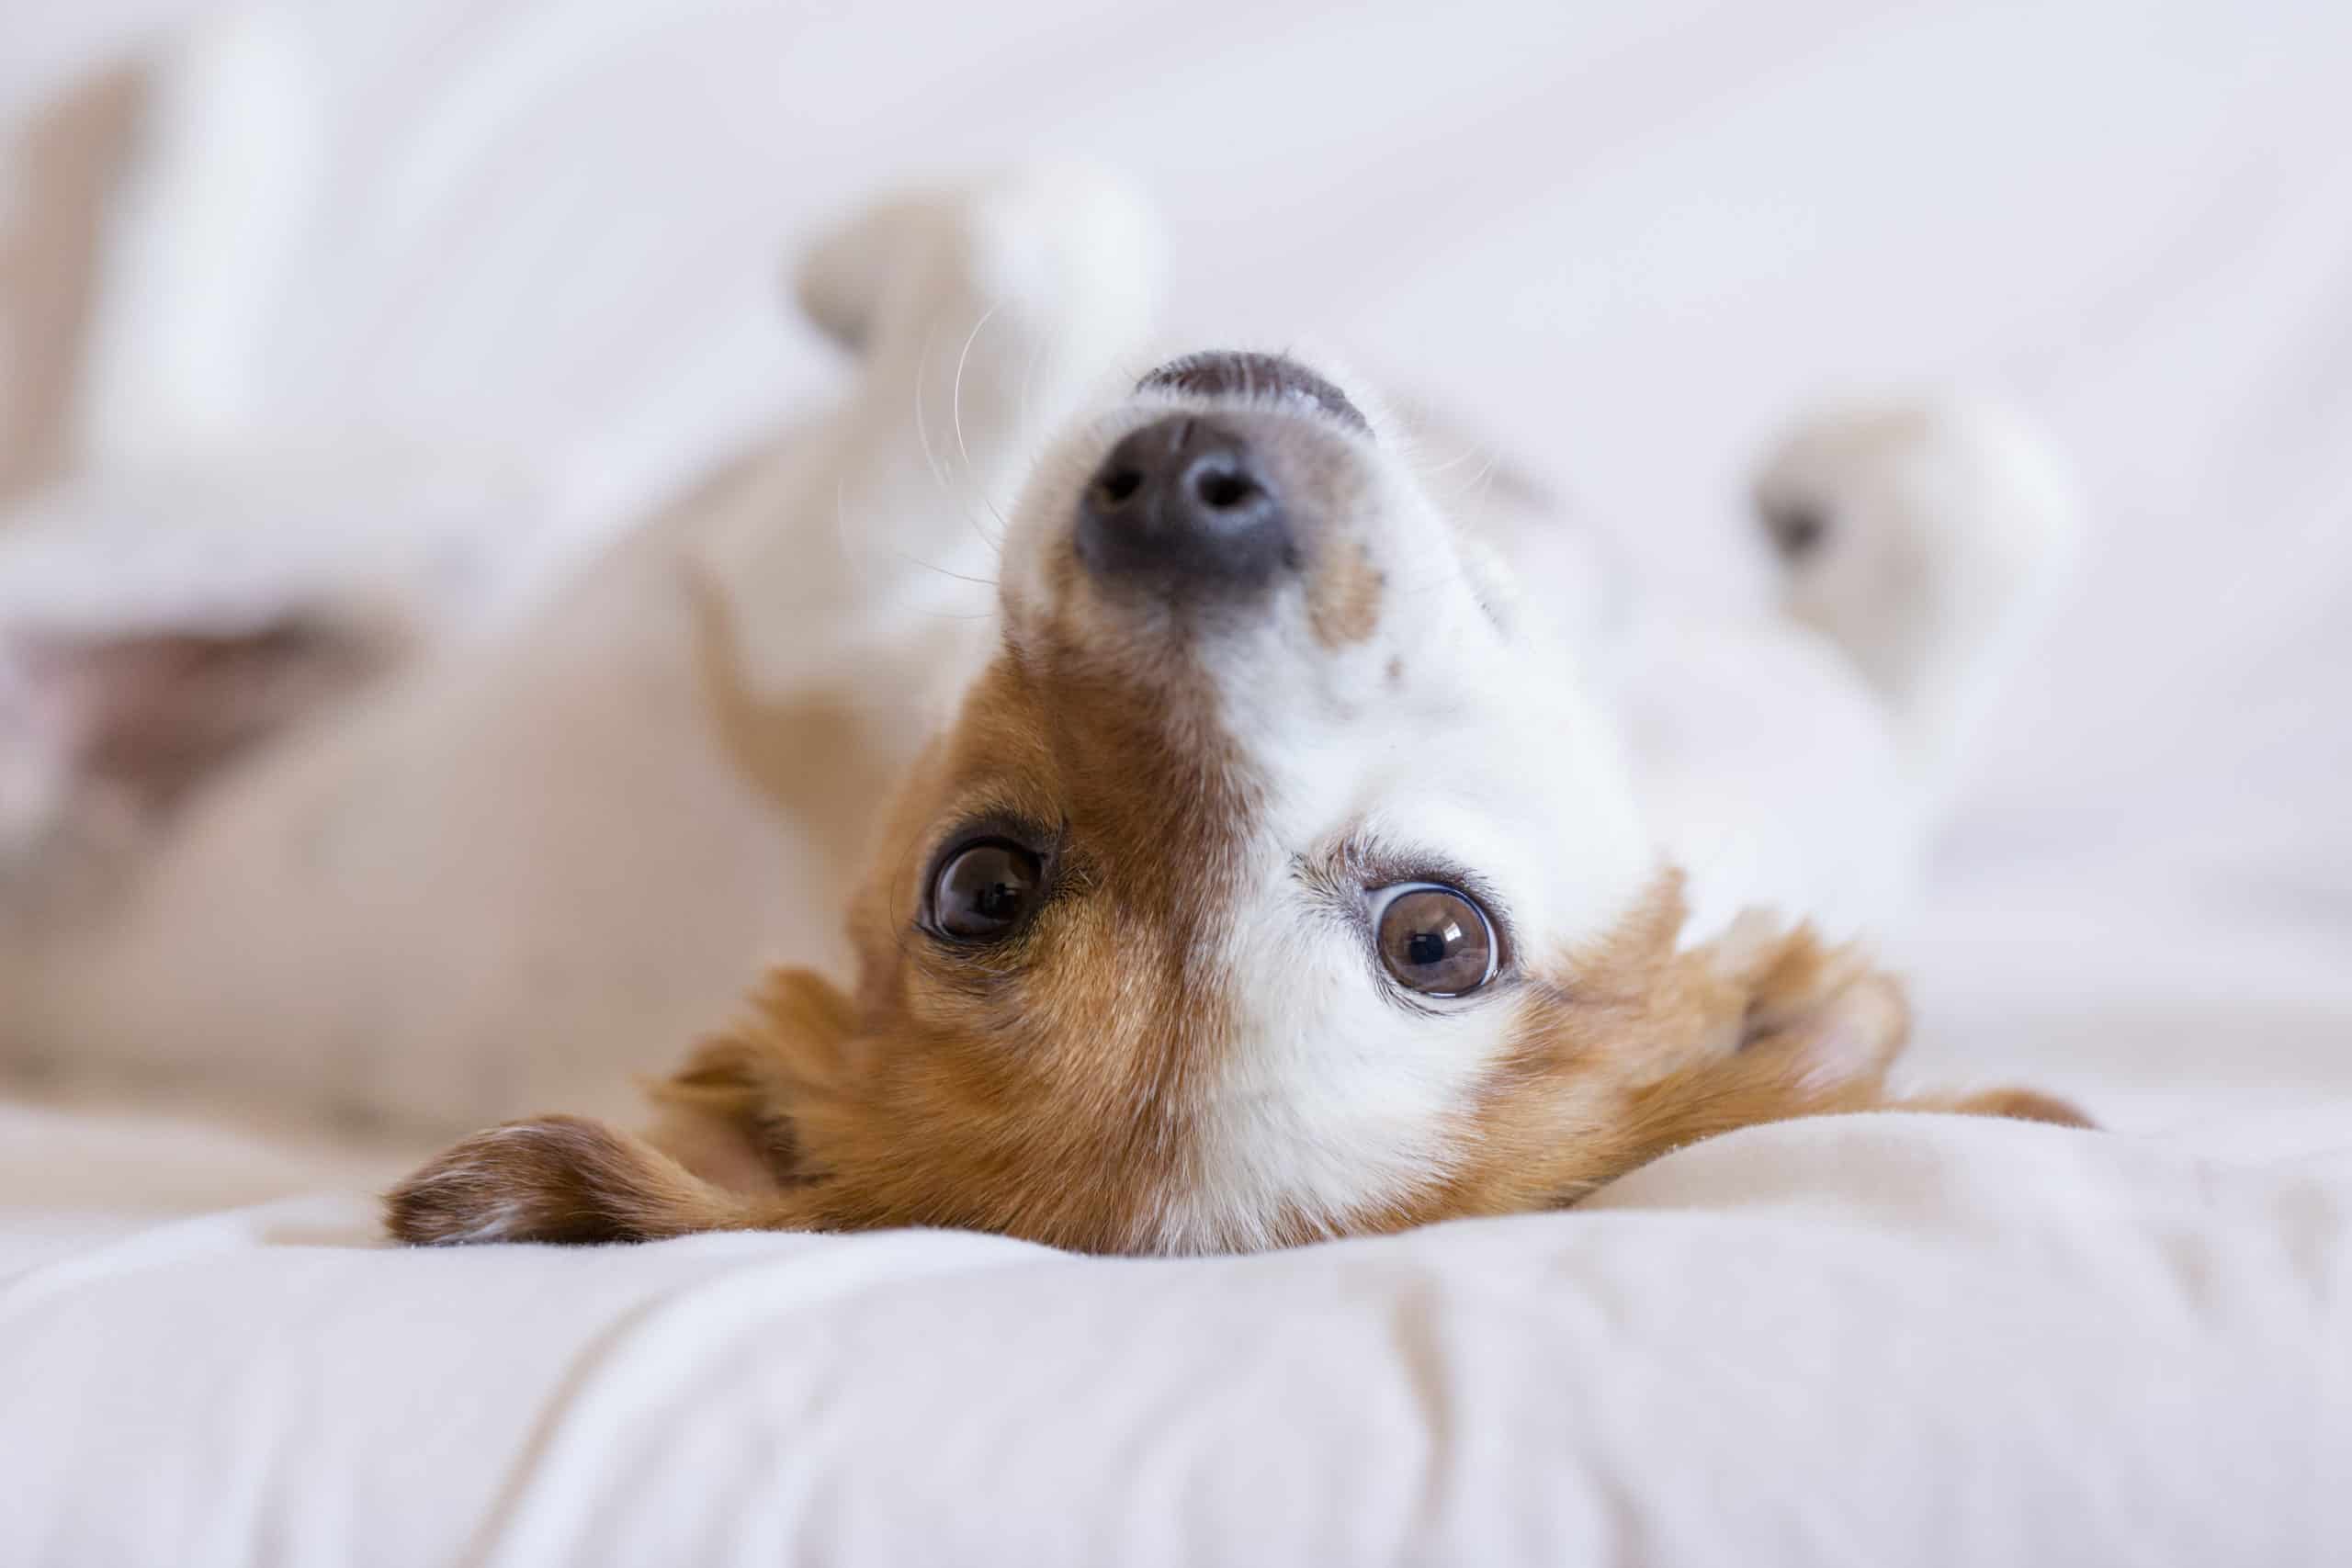 Can dogs tell when you are asleep?